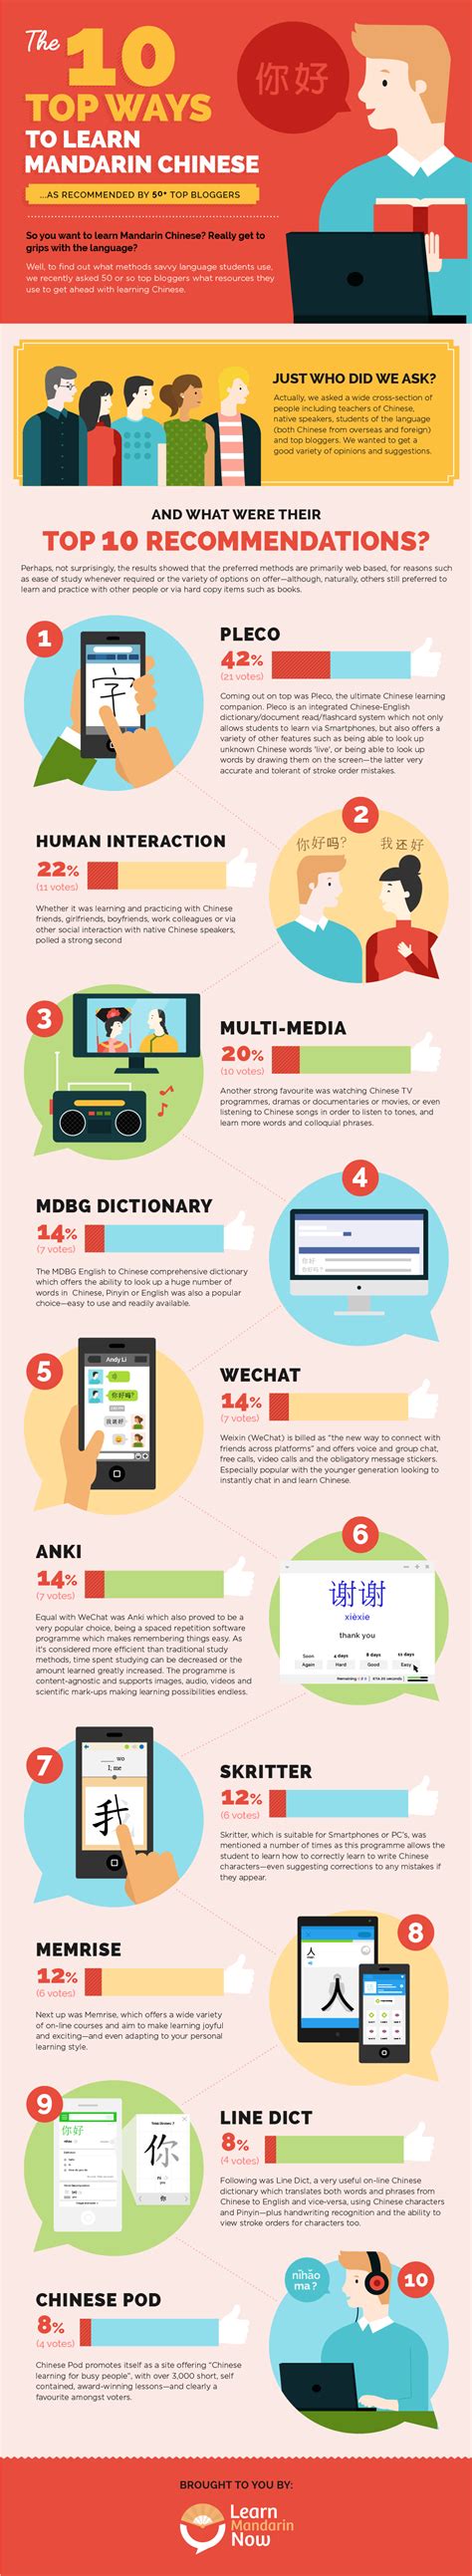 From dictionaries to character writing apps, these are the 15 best apps to learn chinese! What's the best way to learn Chinese?